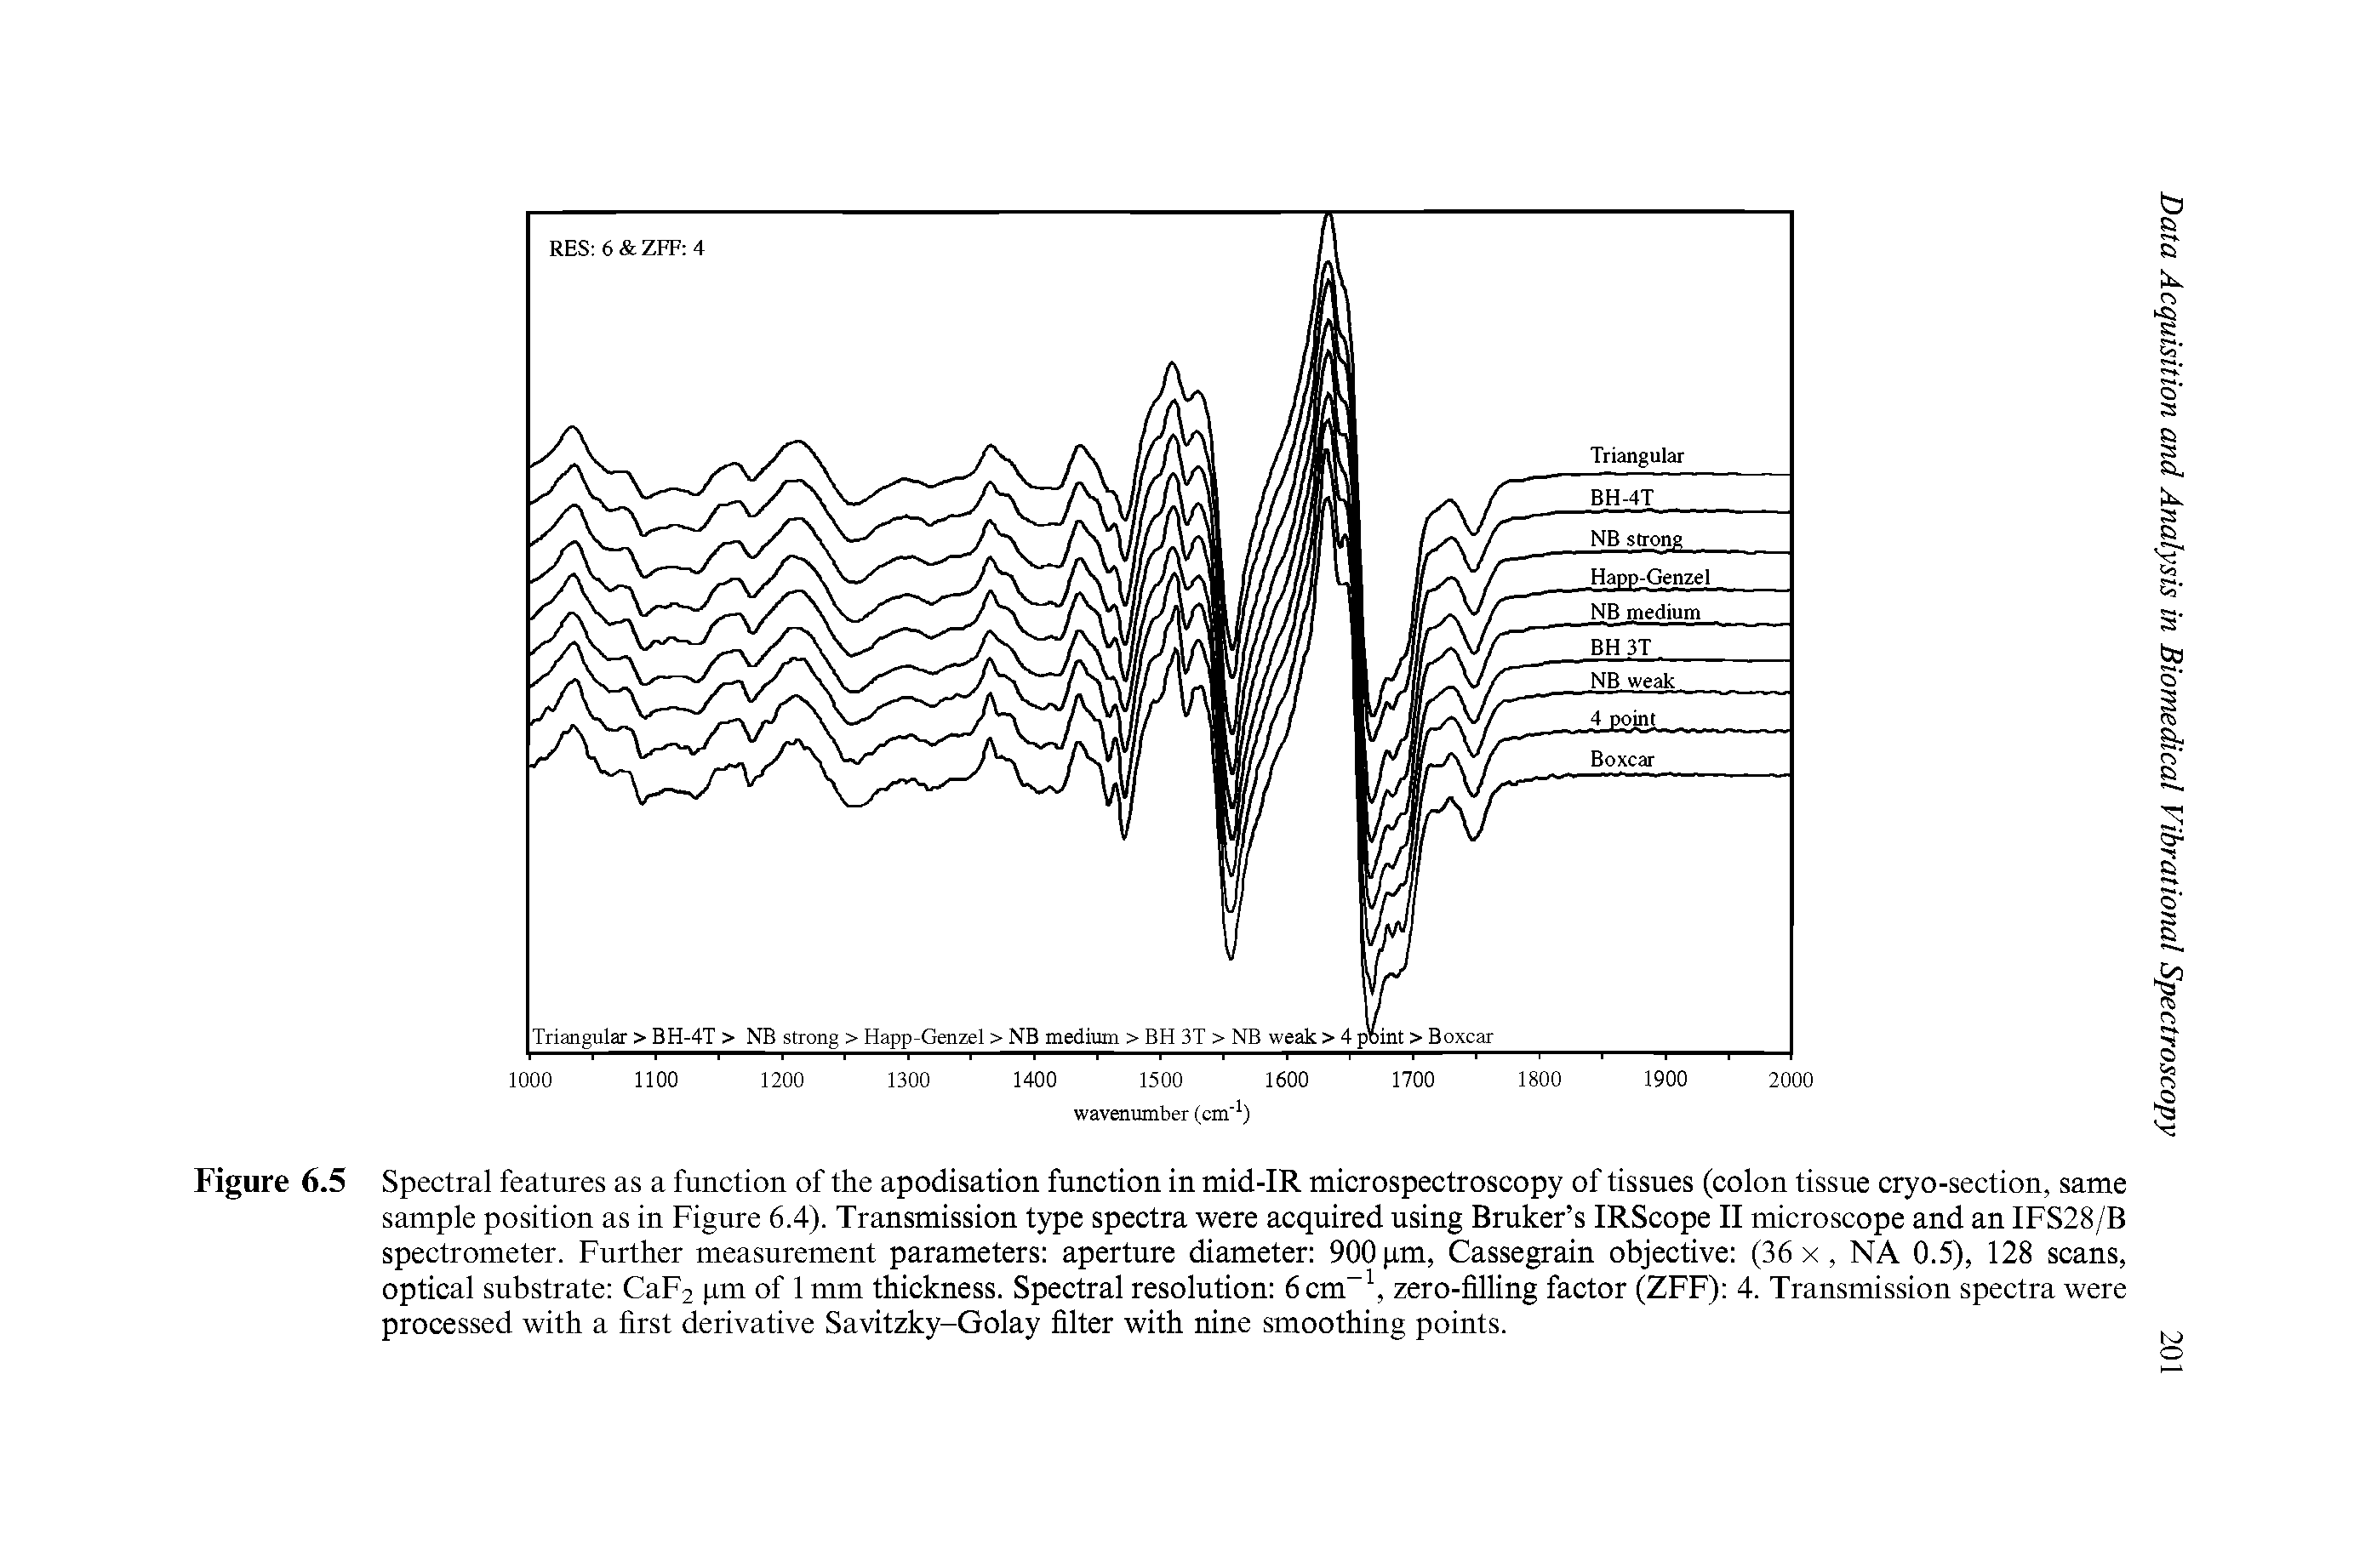 Figure 6.5 Spectral features as a function of the apodisation function in mid-IR microspectroscopy of tissues (colon tissue cryo-section, same sample position as in Figure 6.4). Transmission type spectra were acquired using Bruker s IRScope II microscope and an IFS28/B spectrometer. Further measurement parameters aperture diameter 900 pm, Cassegrain objective (36 x, NA 0.5), 128 scans, optical substrate CaF2 pm of 1 mm thickness. Spectral resolution 6 cm zero-filling factor (ZFF) 4. Transmission spectra were processed with a first derivative Savitzky-Golay filter with nine smoothing points.